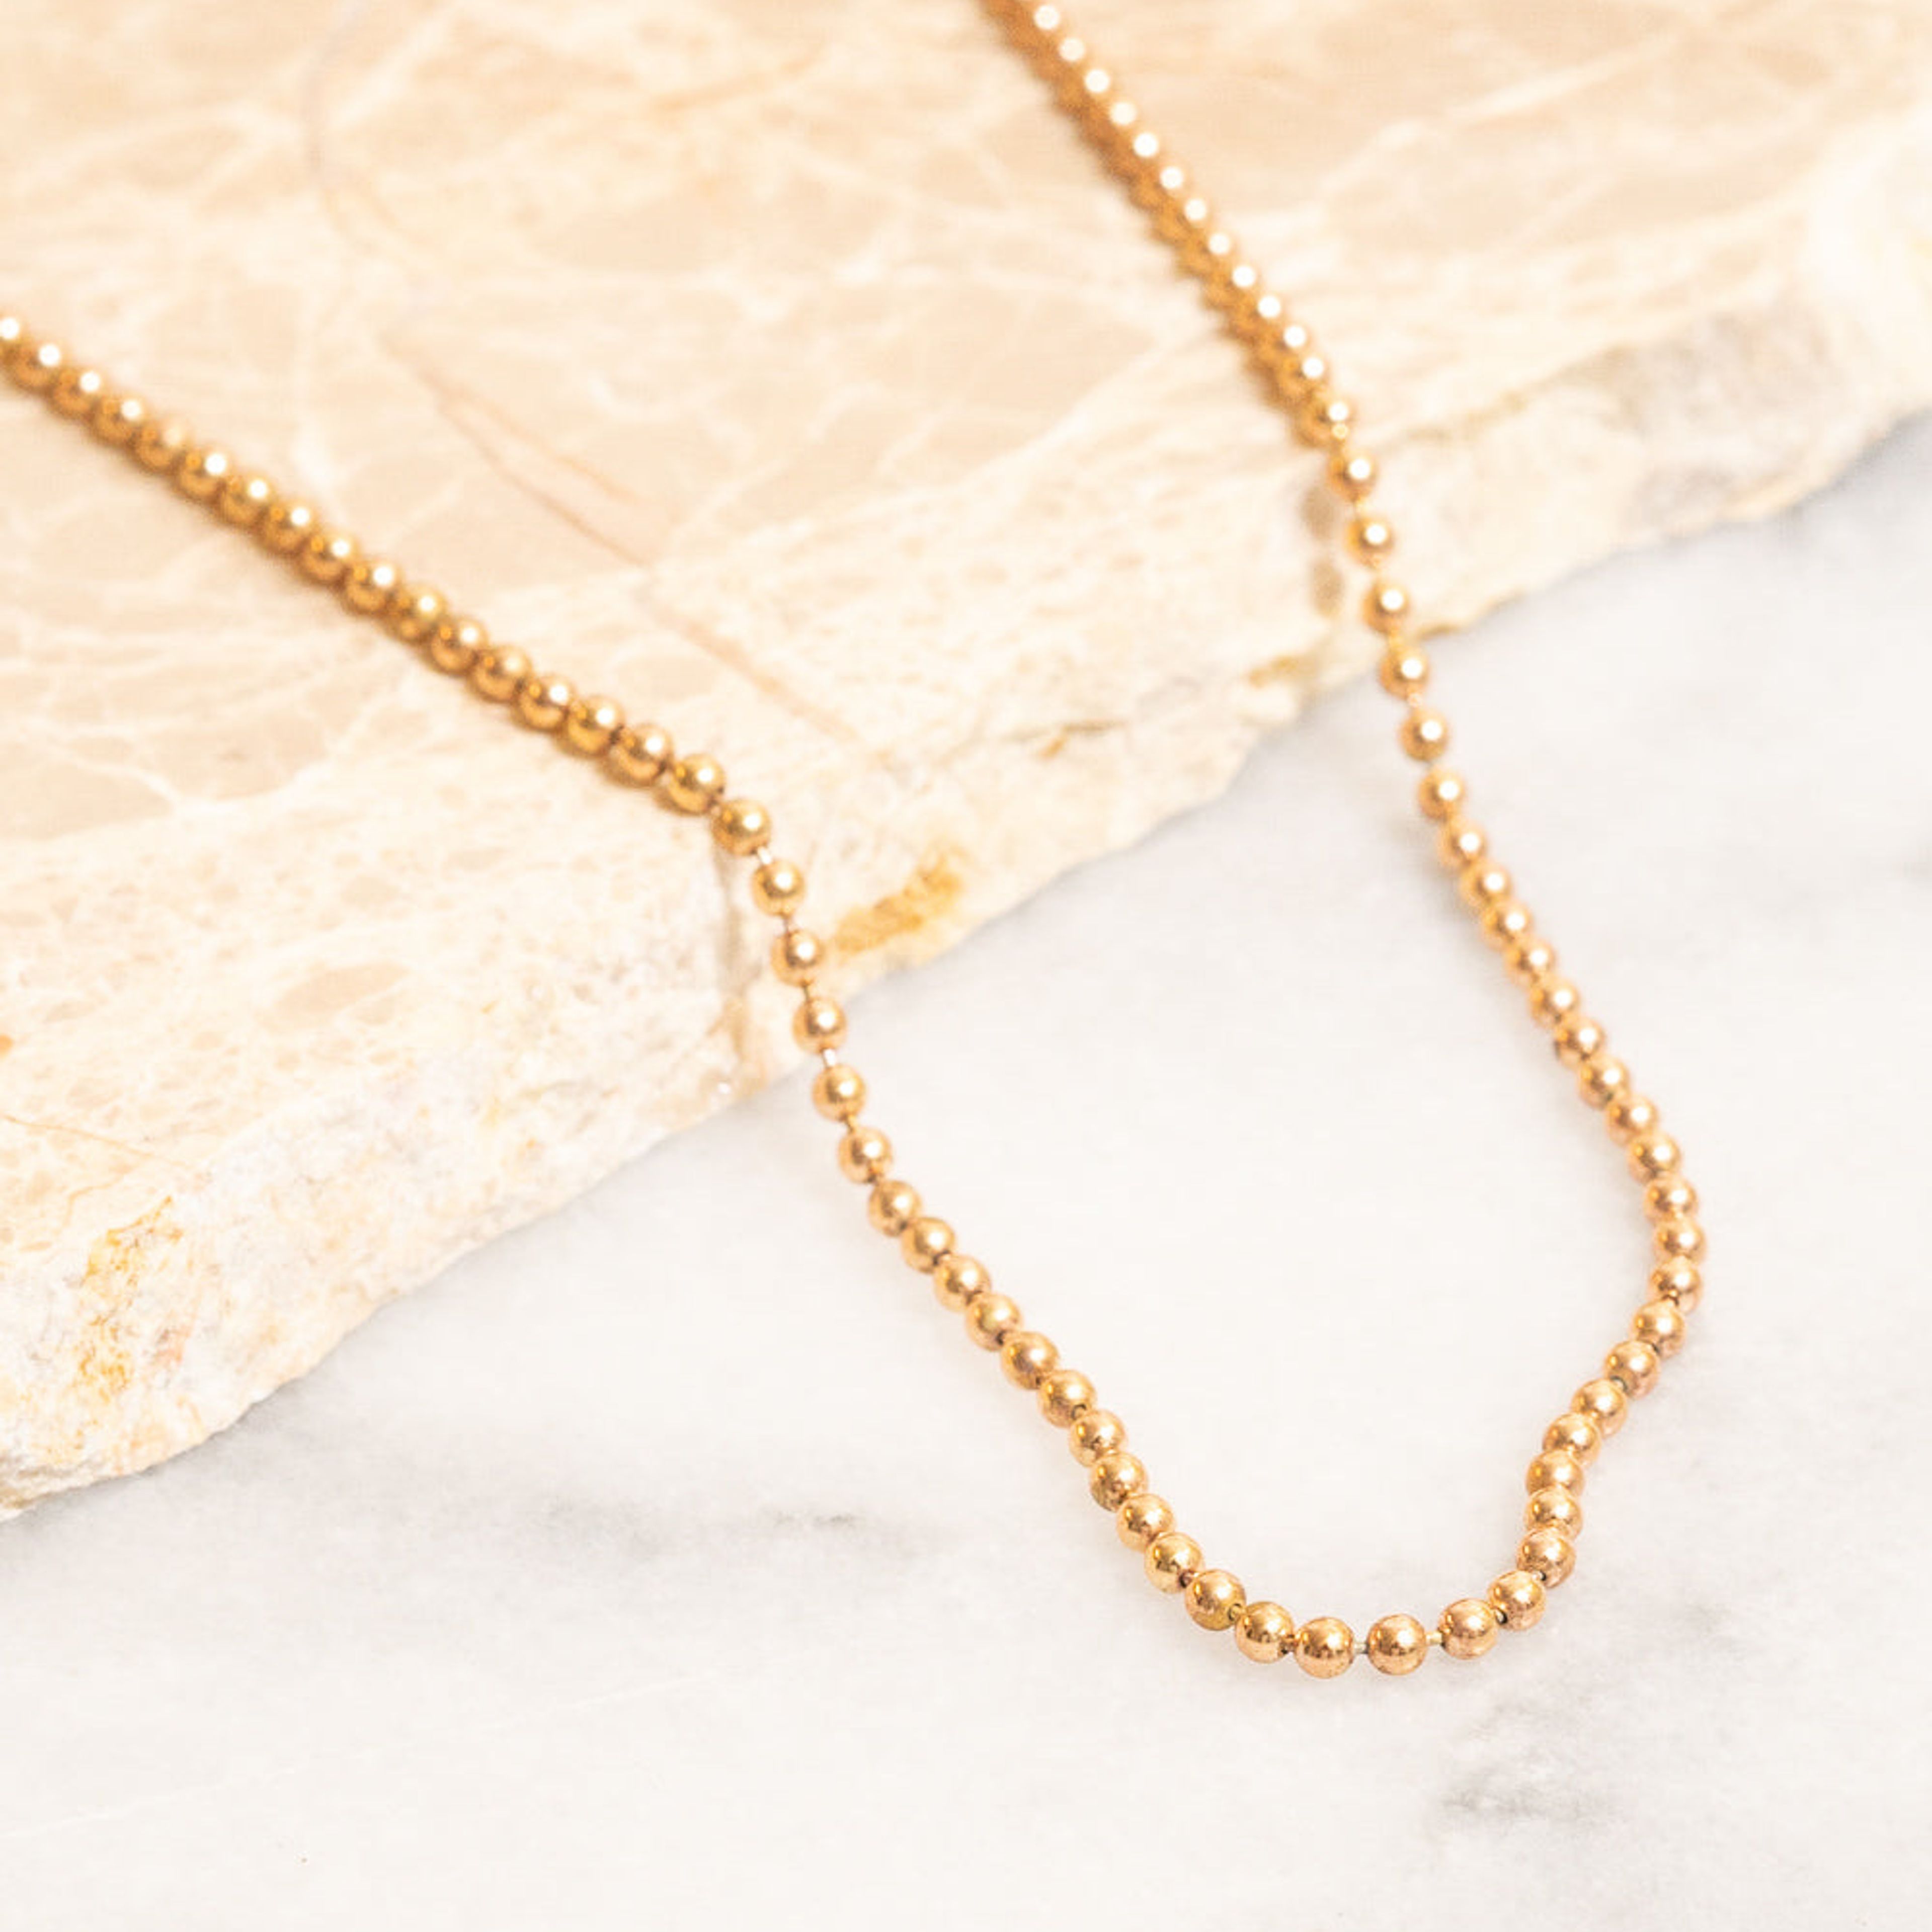 2mm ball chain necklace | 14k Gold-Filled